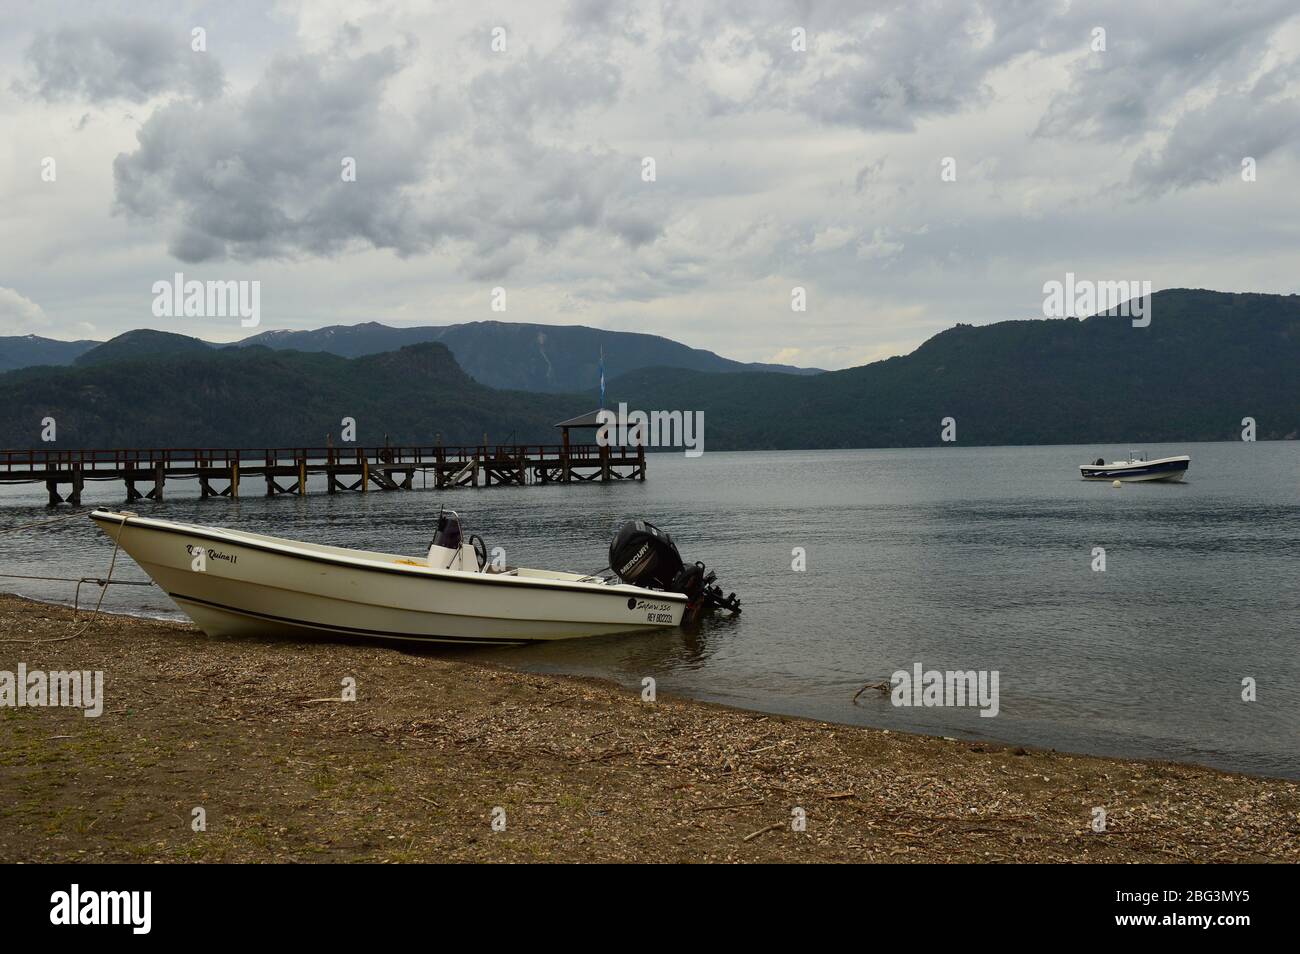 Boats and a Jetty on a Patagonian Lake Stock Photo